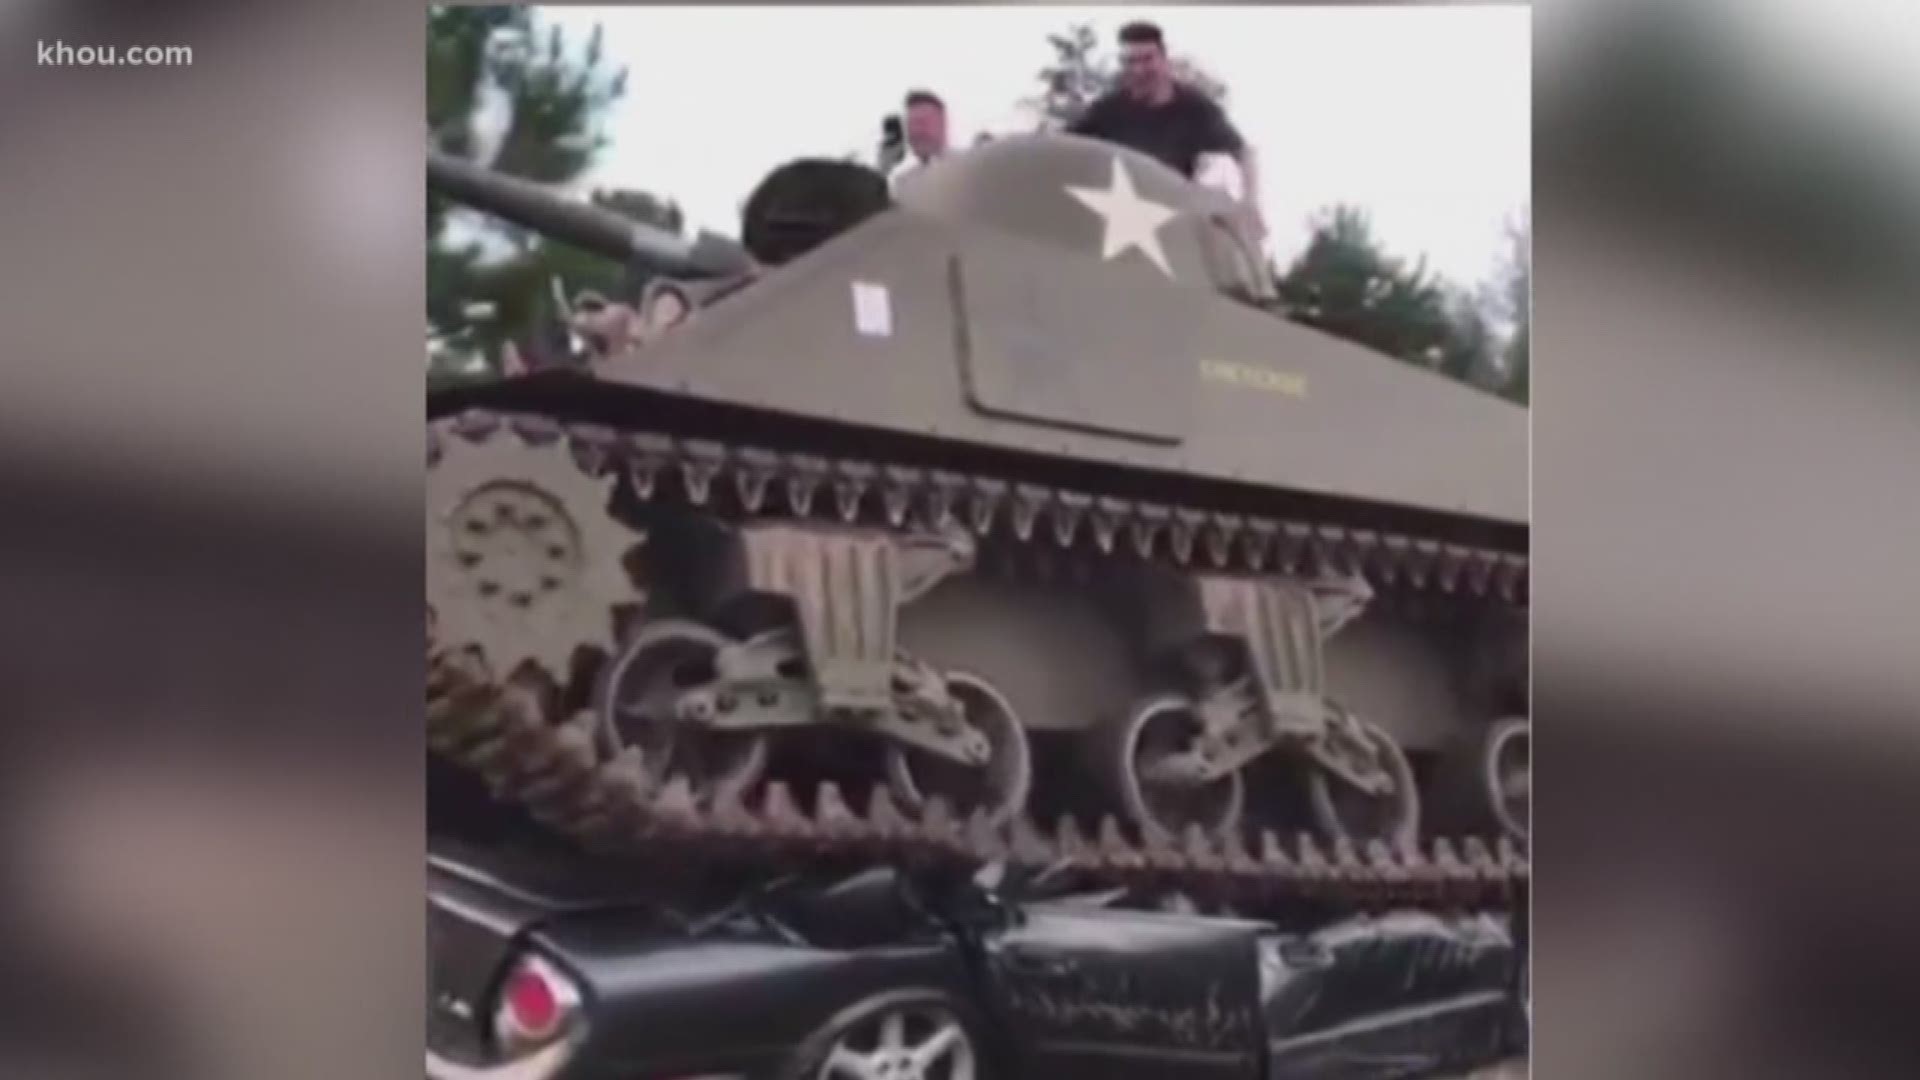 A World War II tank owned by a high-profile attorney here in Houston now has a new home in College Station. The tank made headlines after Tony Buzbee parked it in front of his River Oaks home, and angering the Homeowners Association. On Saturday, the keys